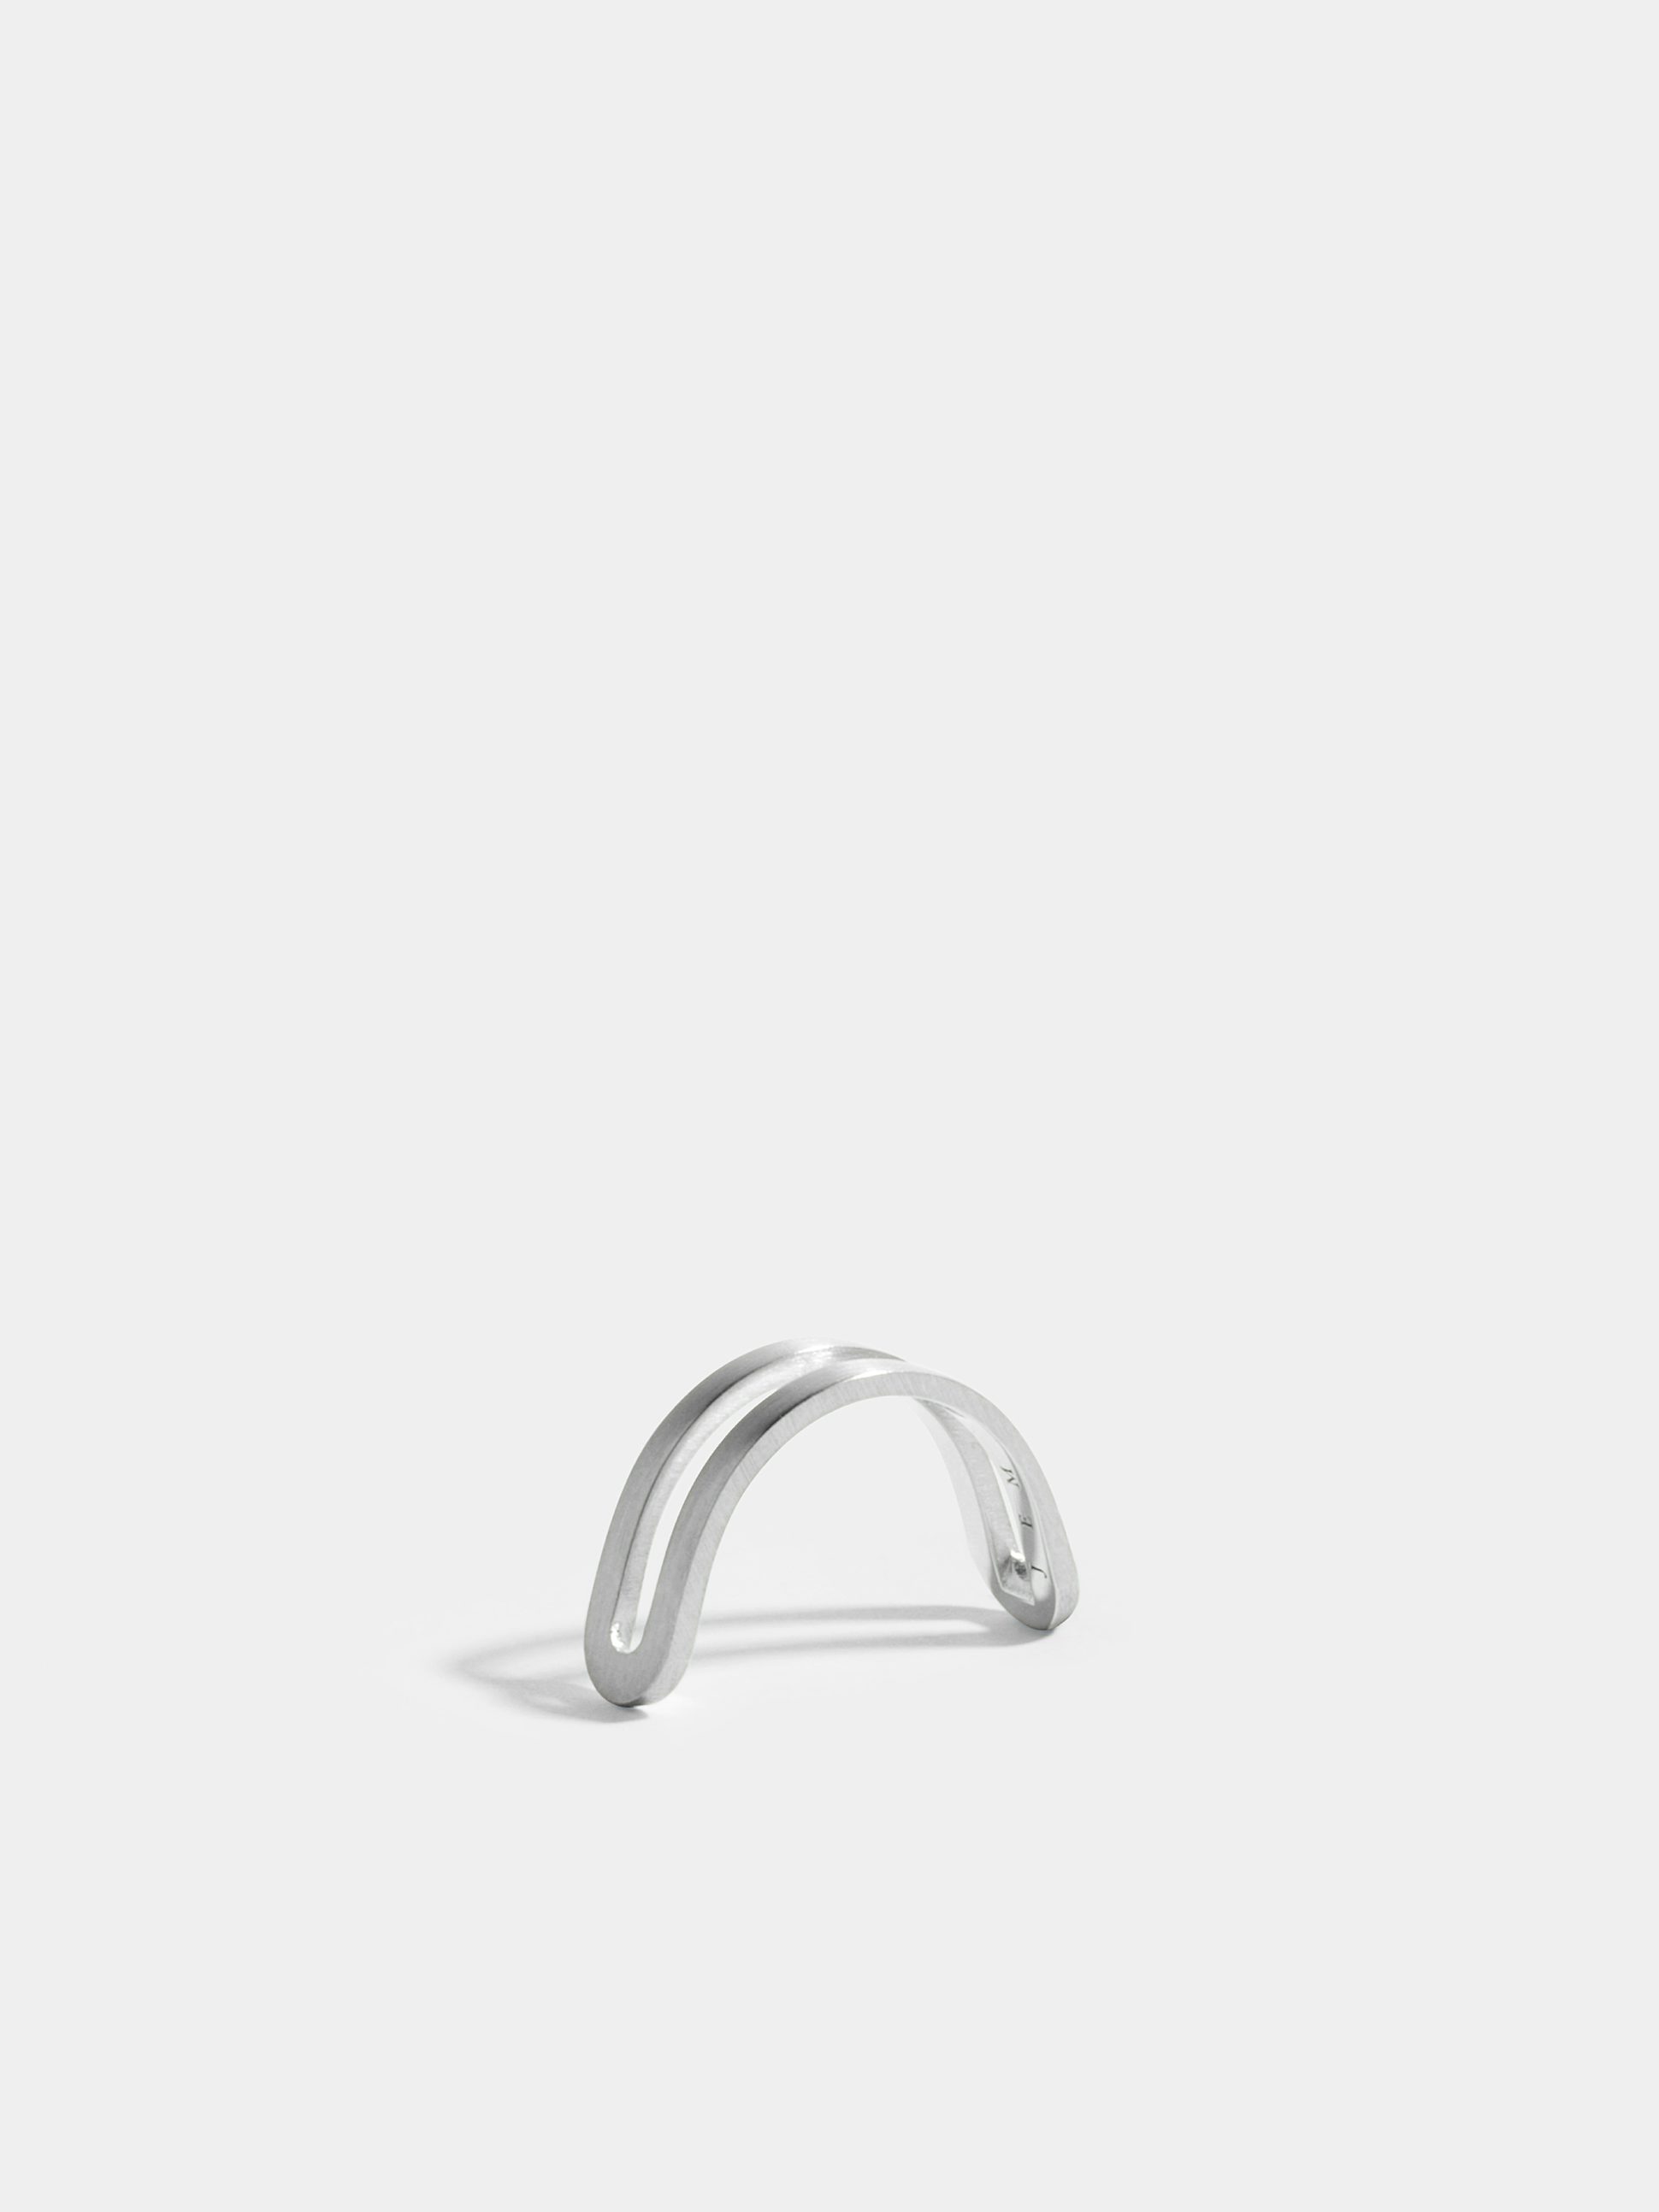 Étreintes simple half-ring in 18k Fairmined ethical white gold, with brushed finish.